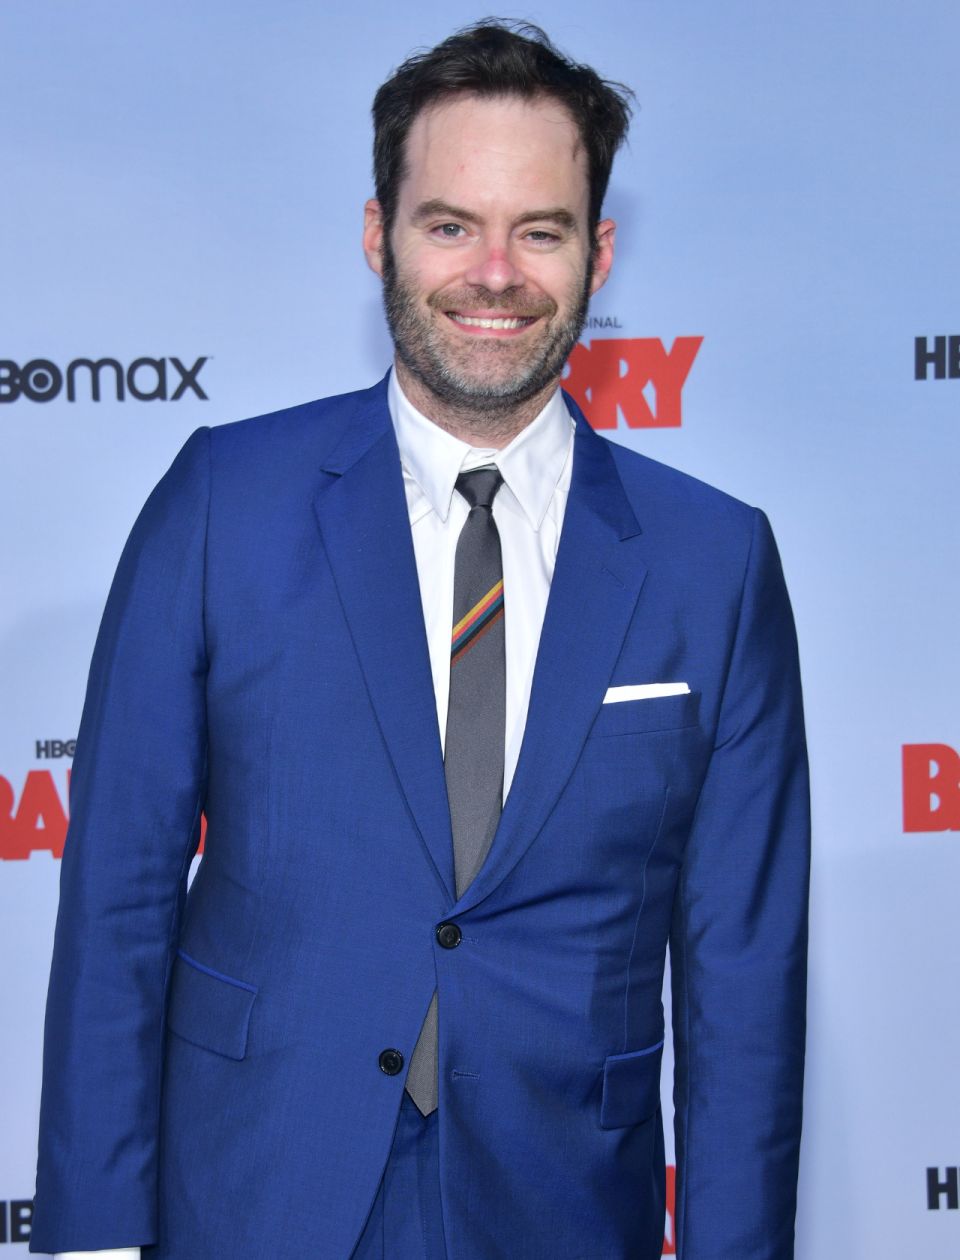 Bill Hader attends the Season 3 premiere of Barry in Culver City, California